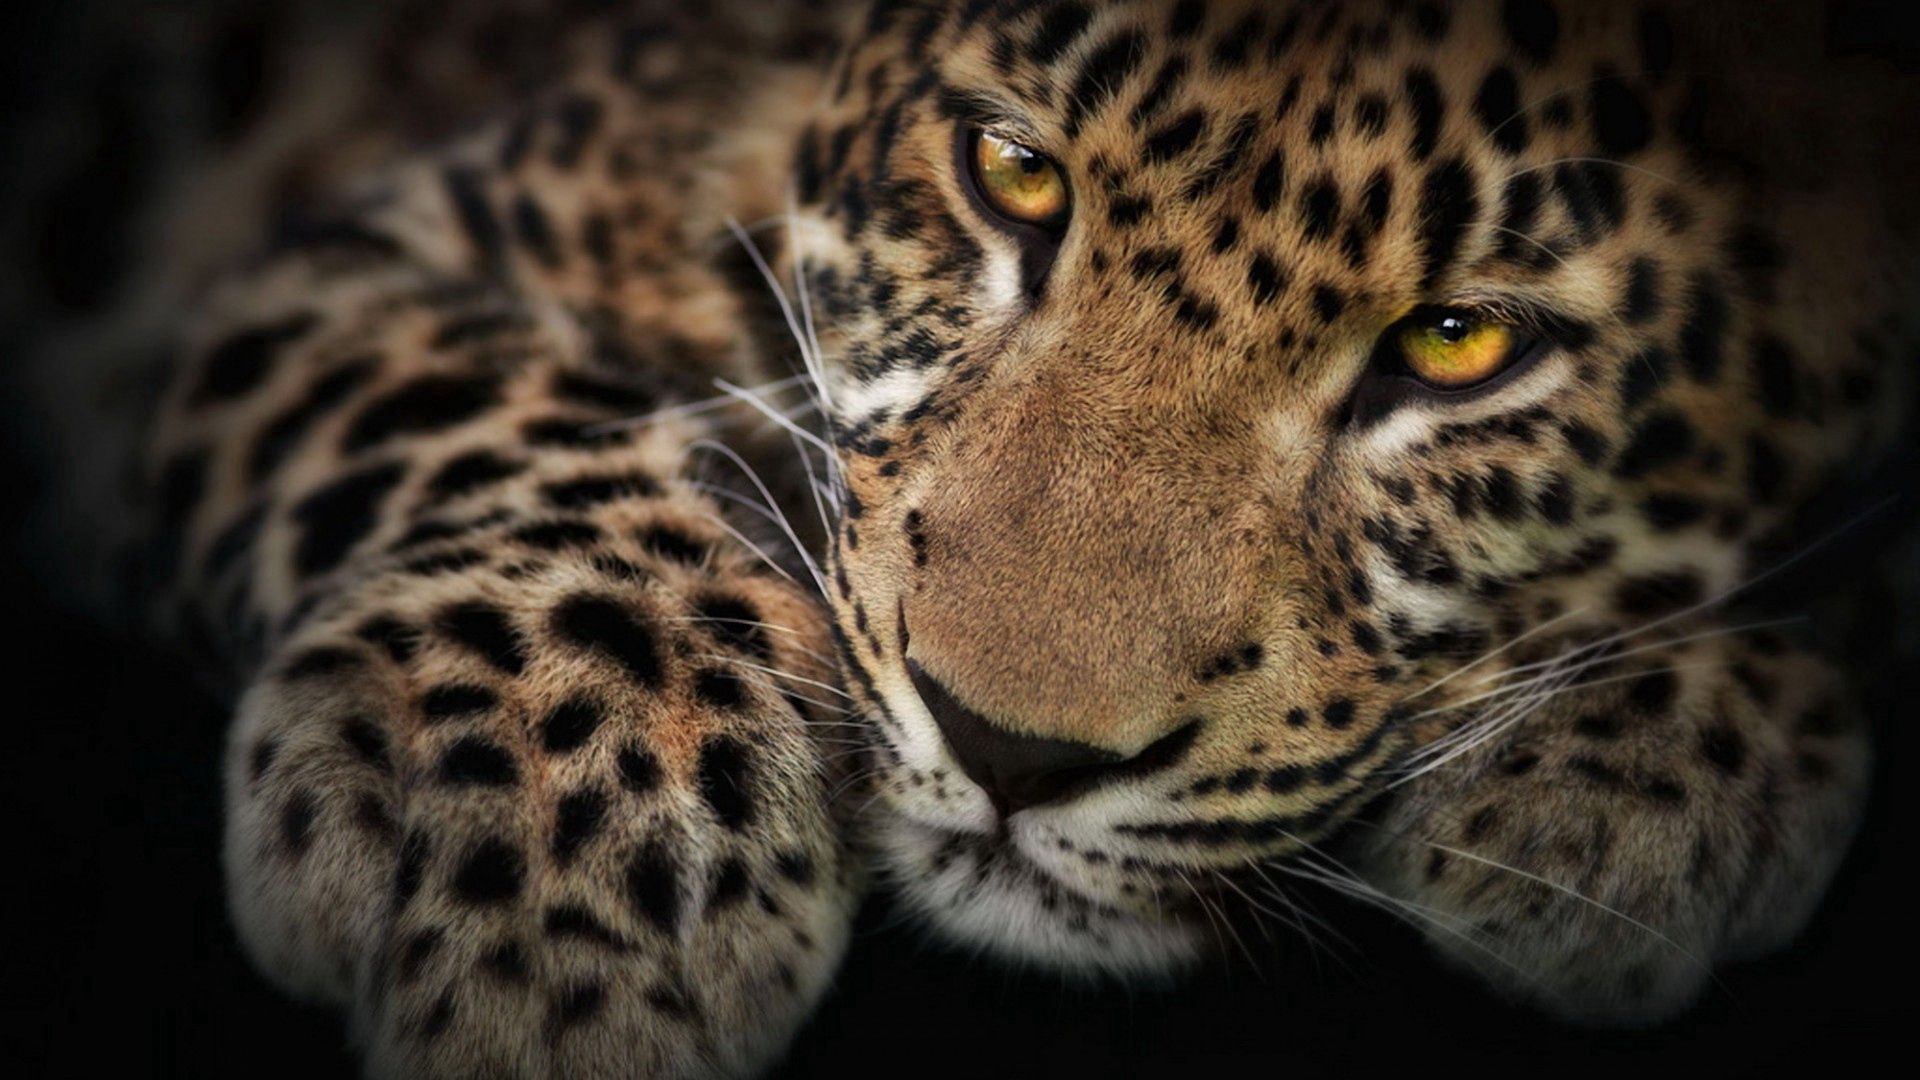 67198 download wallpaper animals, leopard, muzzle, shadow, predator screensavers and pictures for free